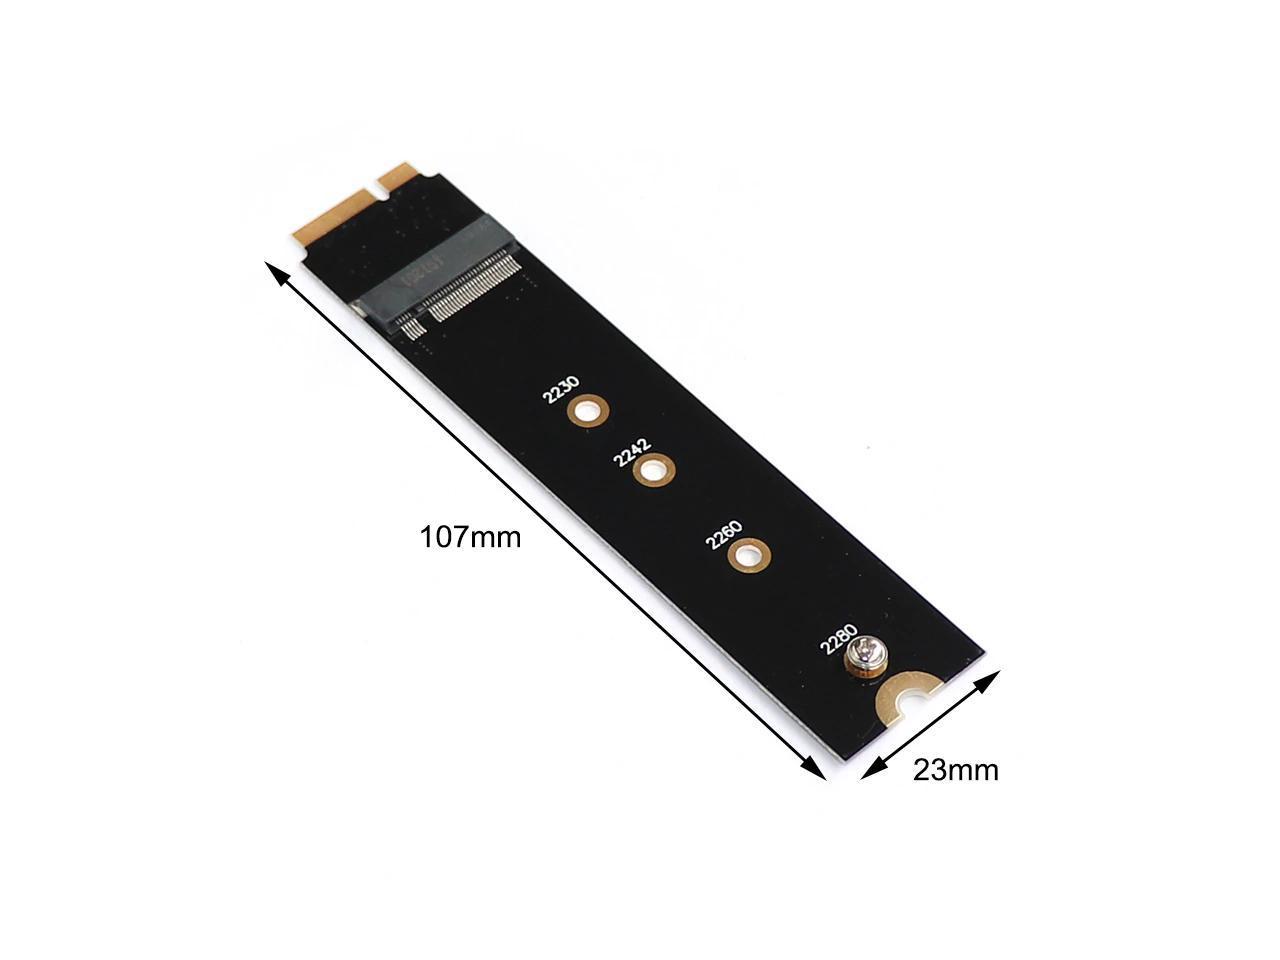 M.2 adapter ssd m.2 m2 NGFF B KEY 2230 2242 2260 2280 adapter connector  Card For Apple 2012 MacBook Air A1465 A1466